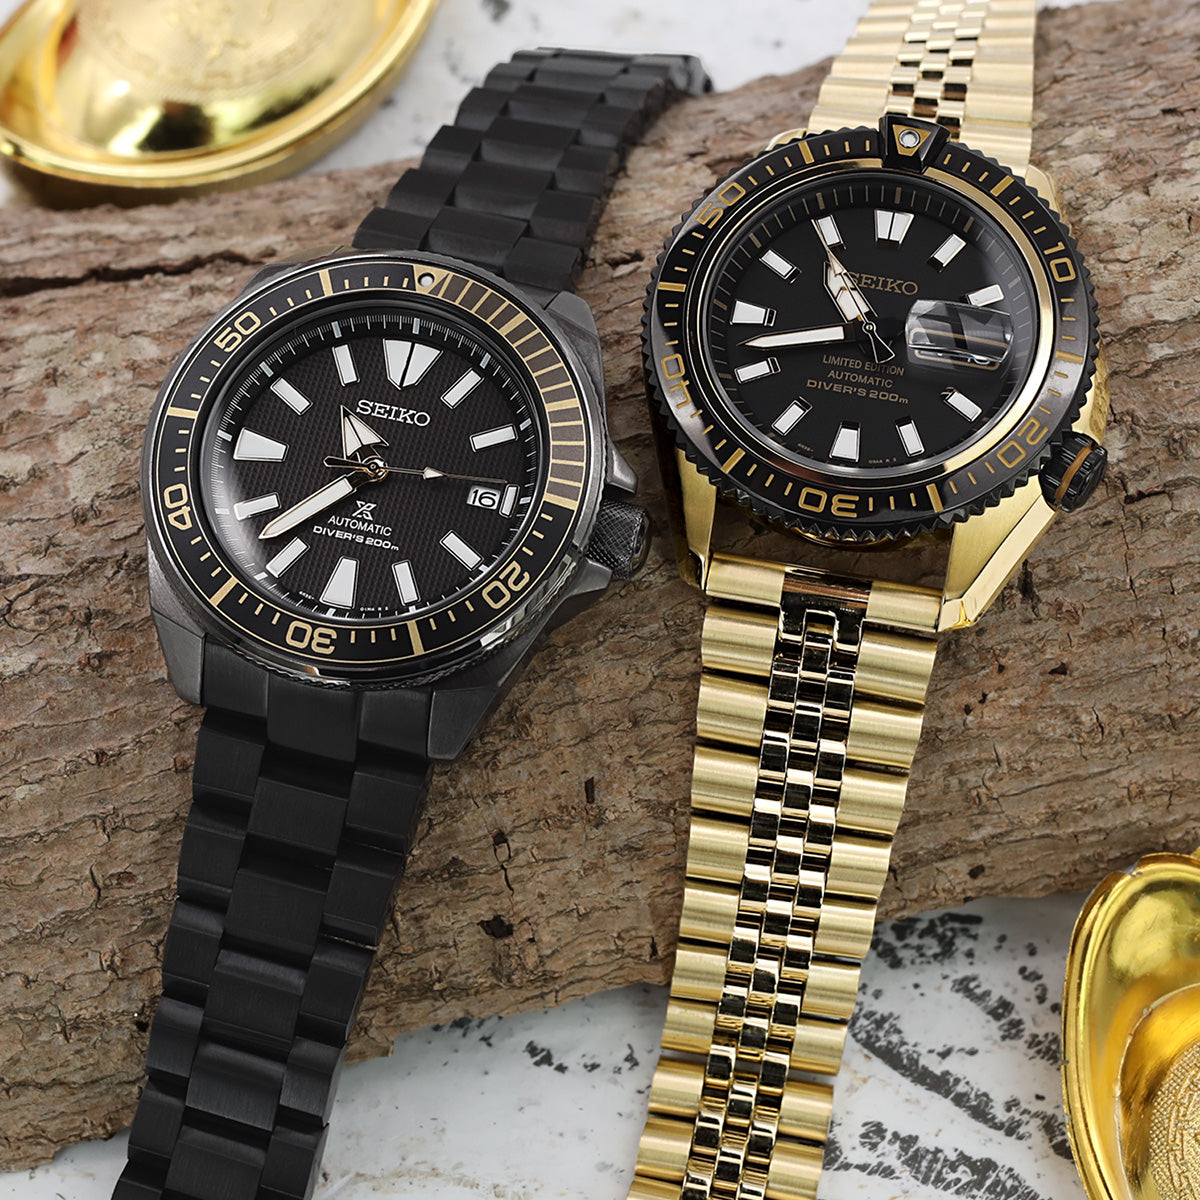 CNY 2022 Greetings & The Best CNY Gold Seiko Watches | Strapcode